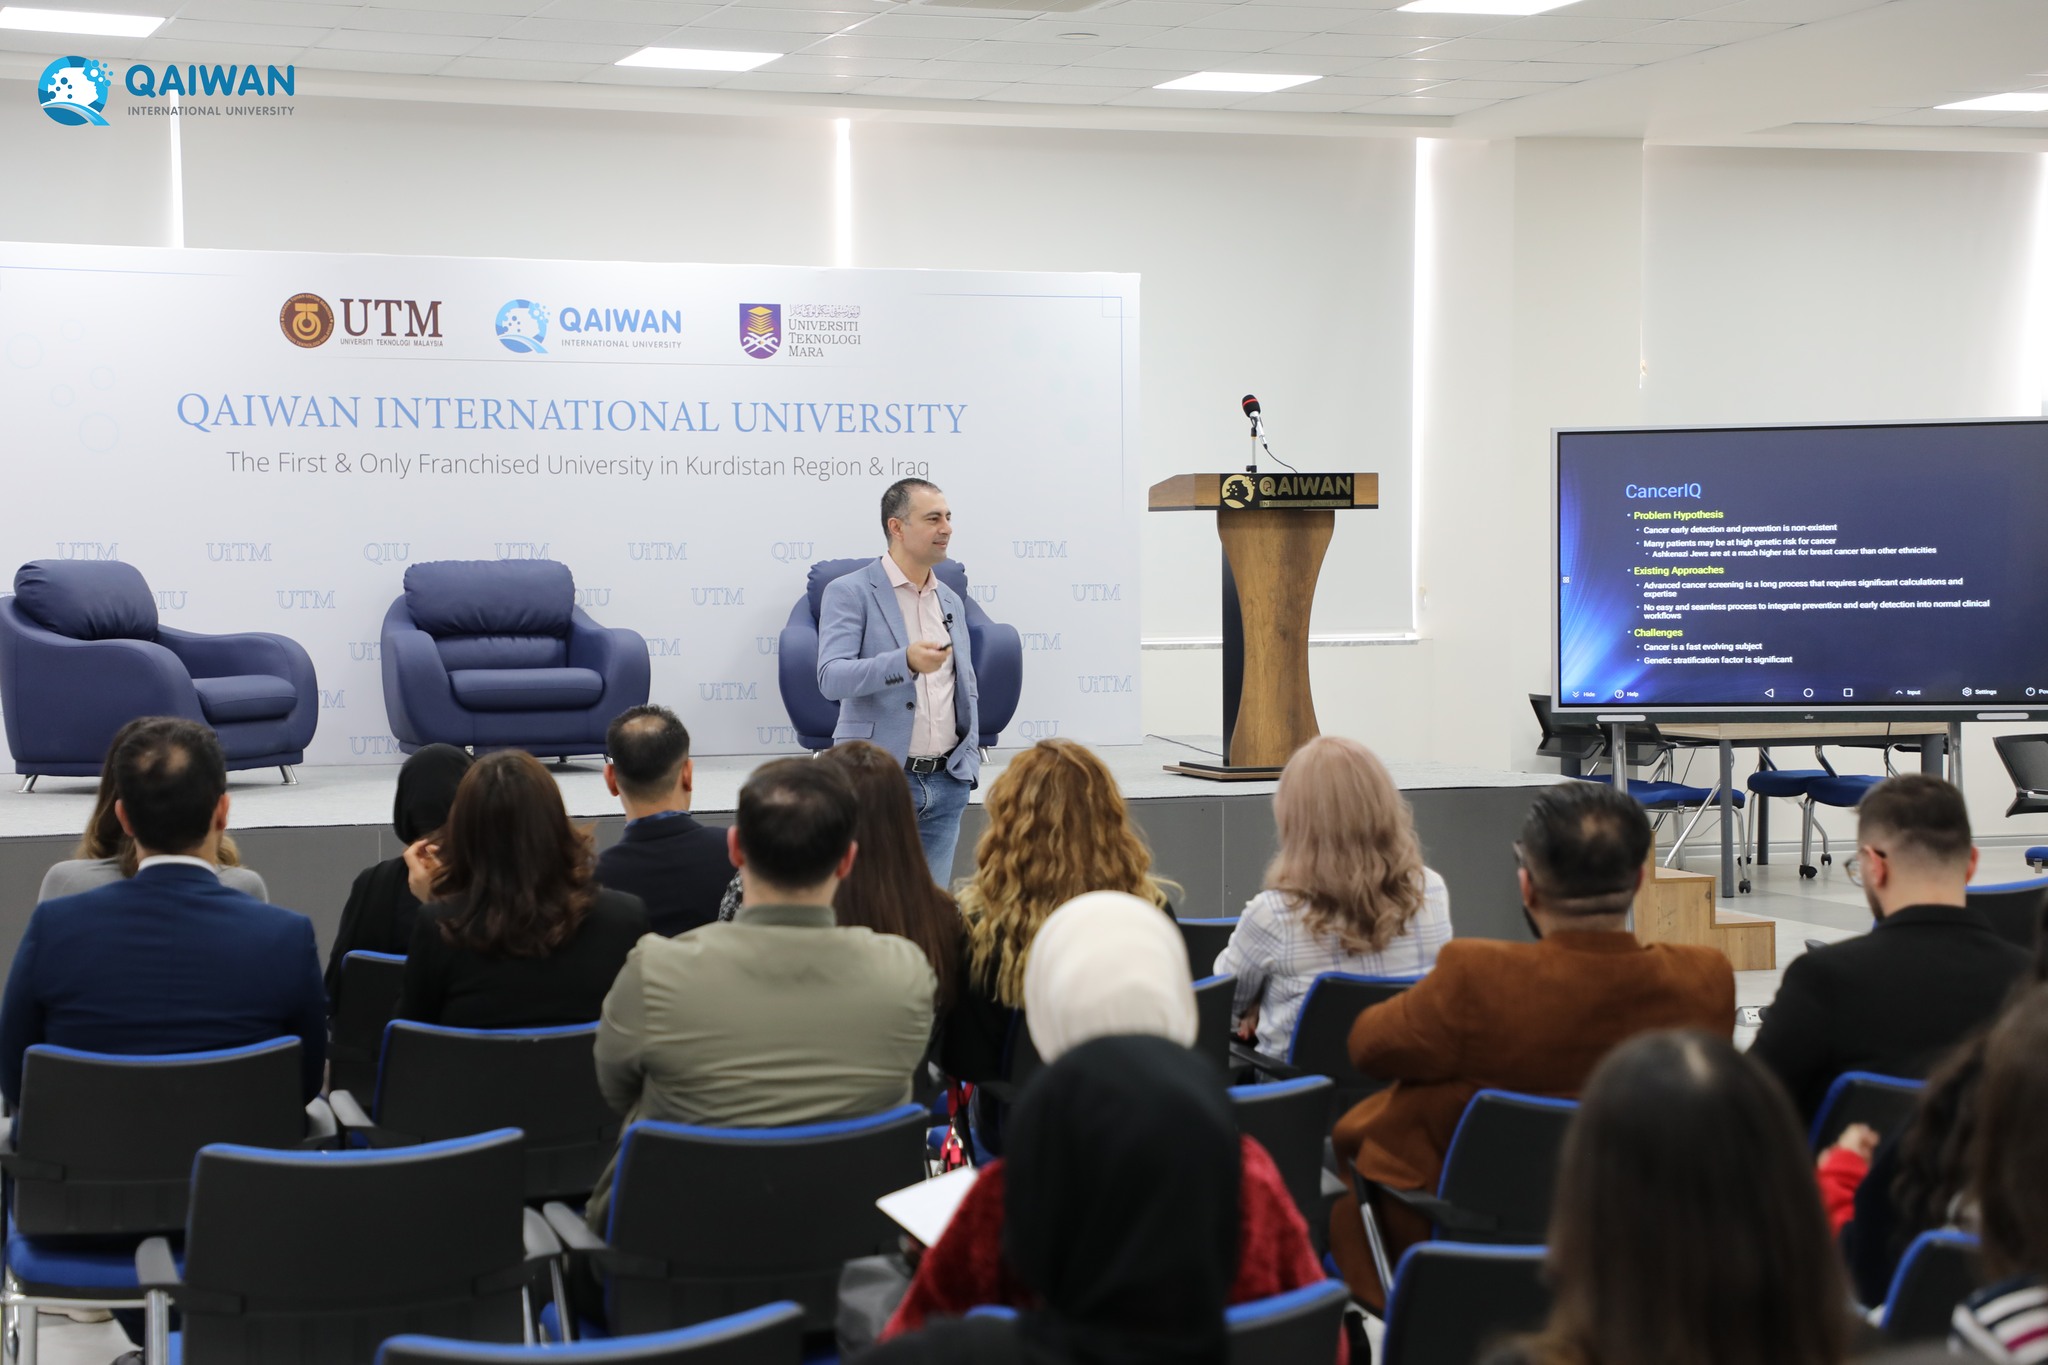 The Faculty of Management and Social Sciences at QIU convened a seminar featuring Mr. Moe Al-Khafaji (Founder and CEO of Pure Platform)